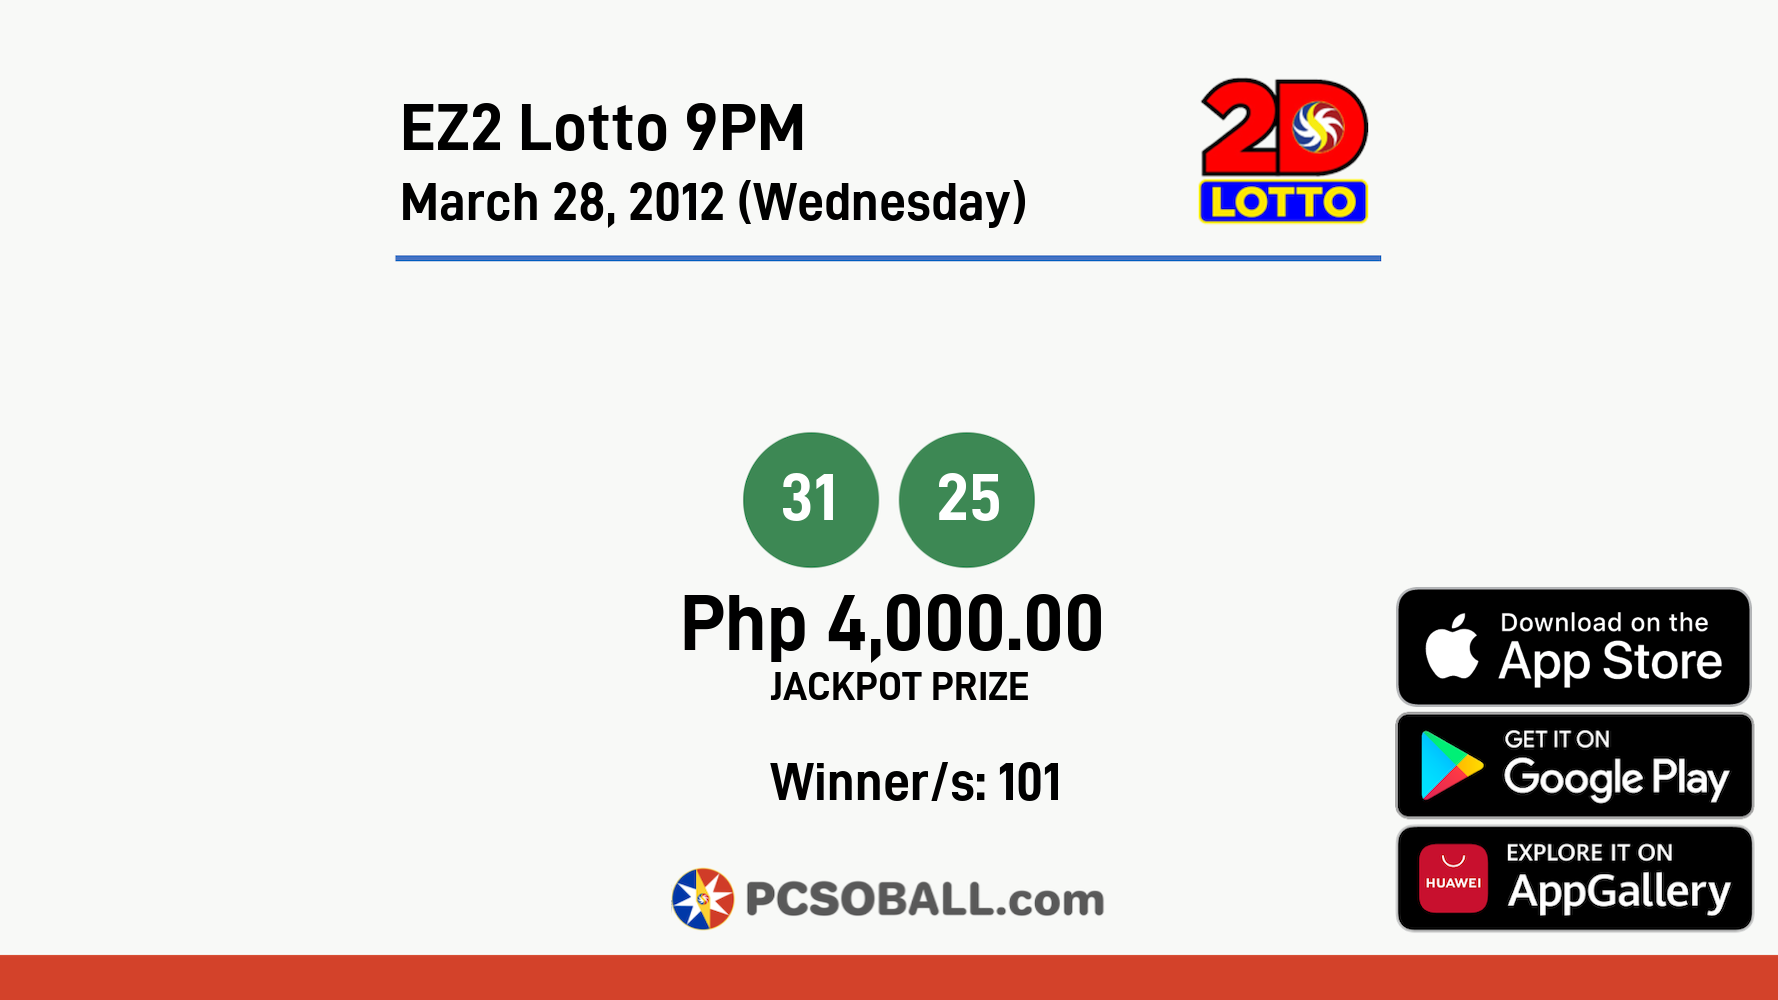 EZ2 Lotto 9PM March 28, 2012 (Wednesday) Result